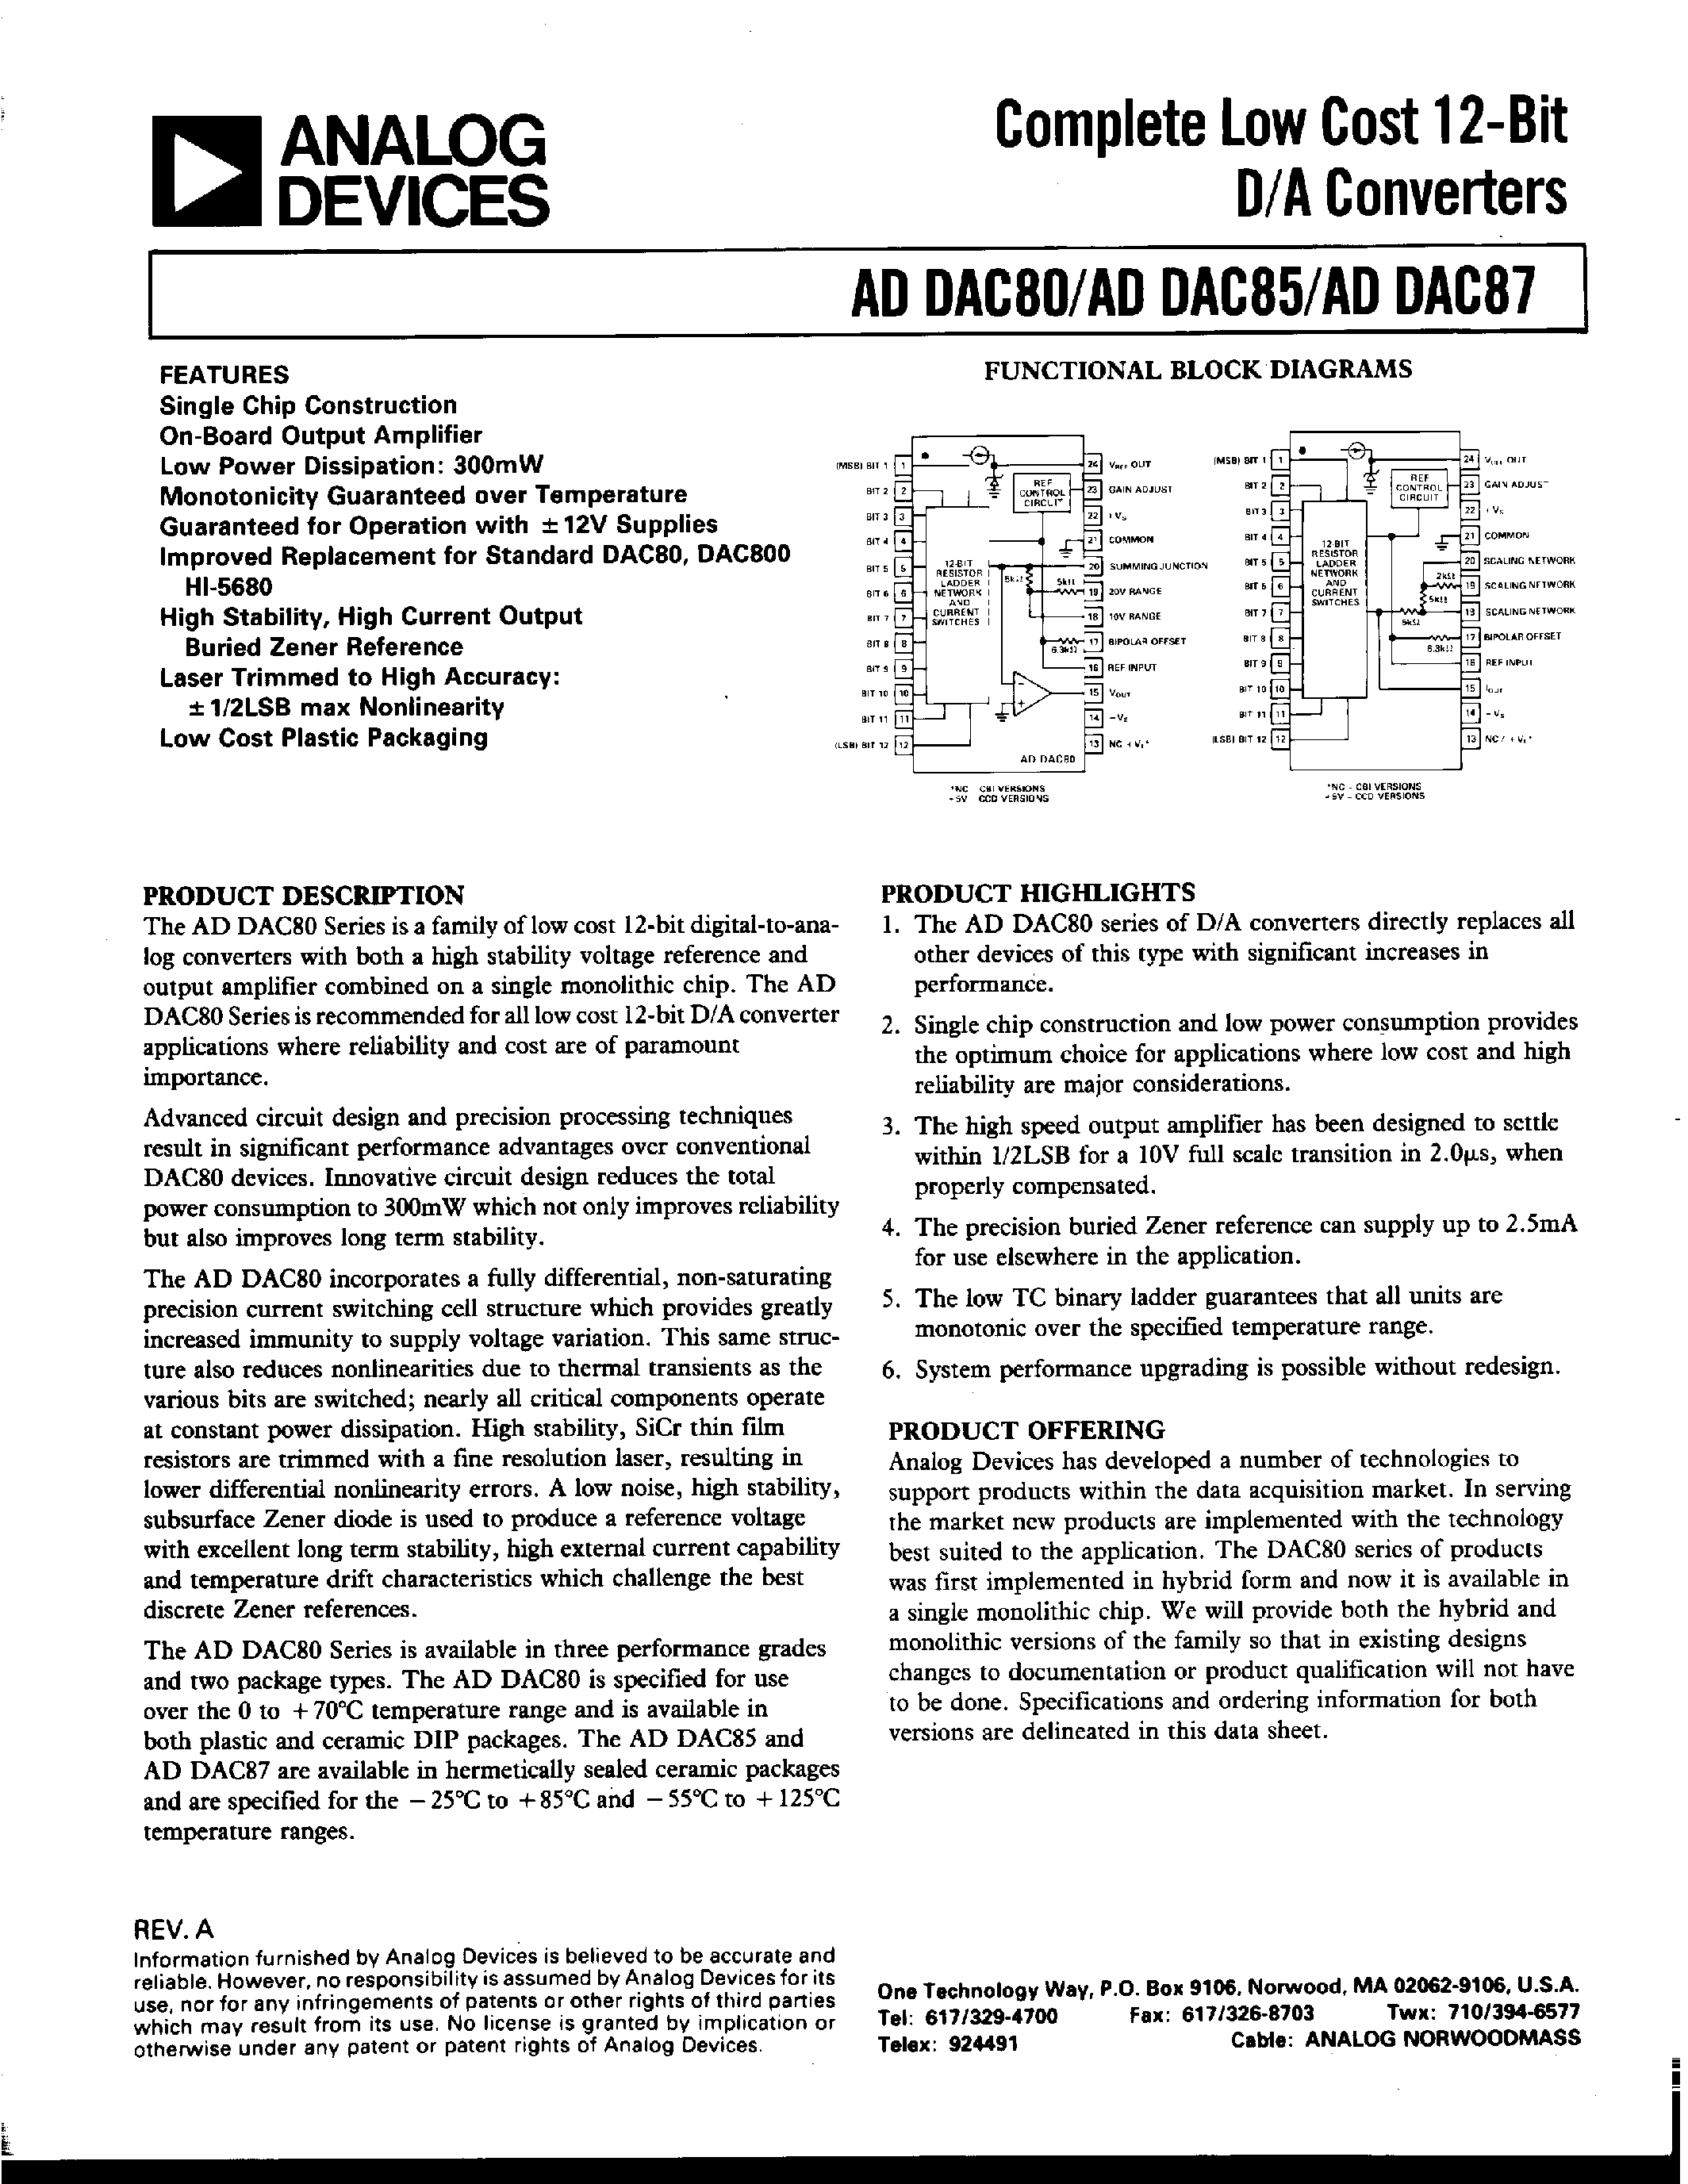 Datasheet ADDAC85C-CBI-V - COMPLETE LOW COST 12-BIT D/A CONVERTERS page 1